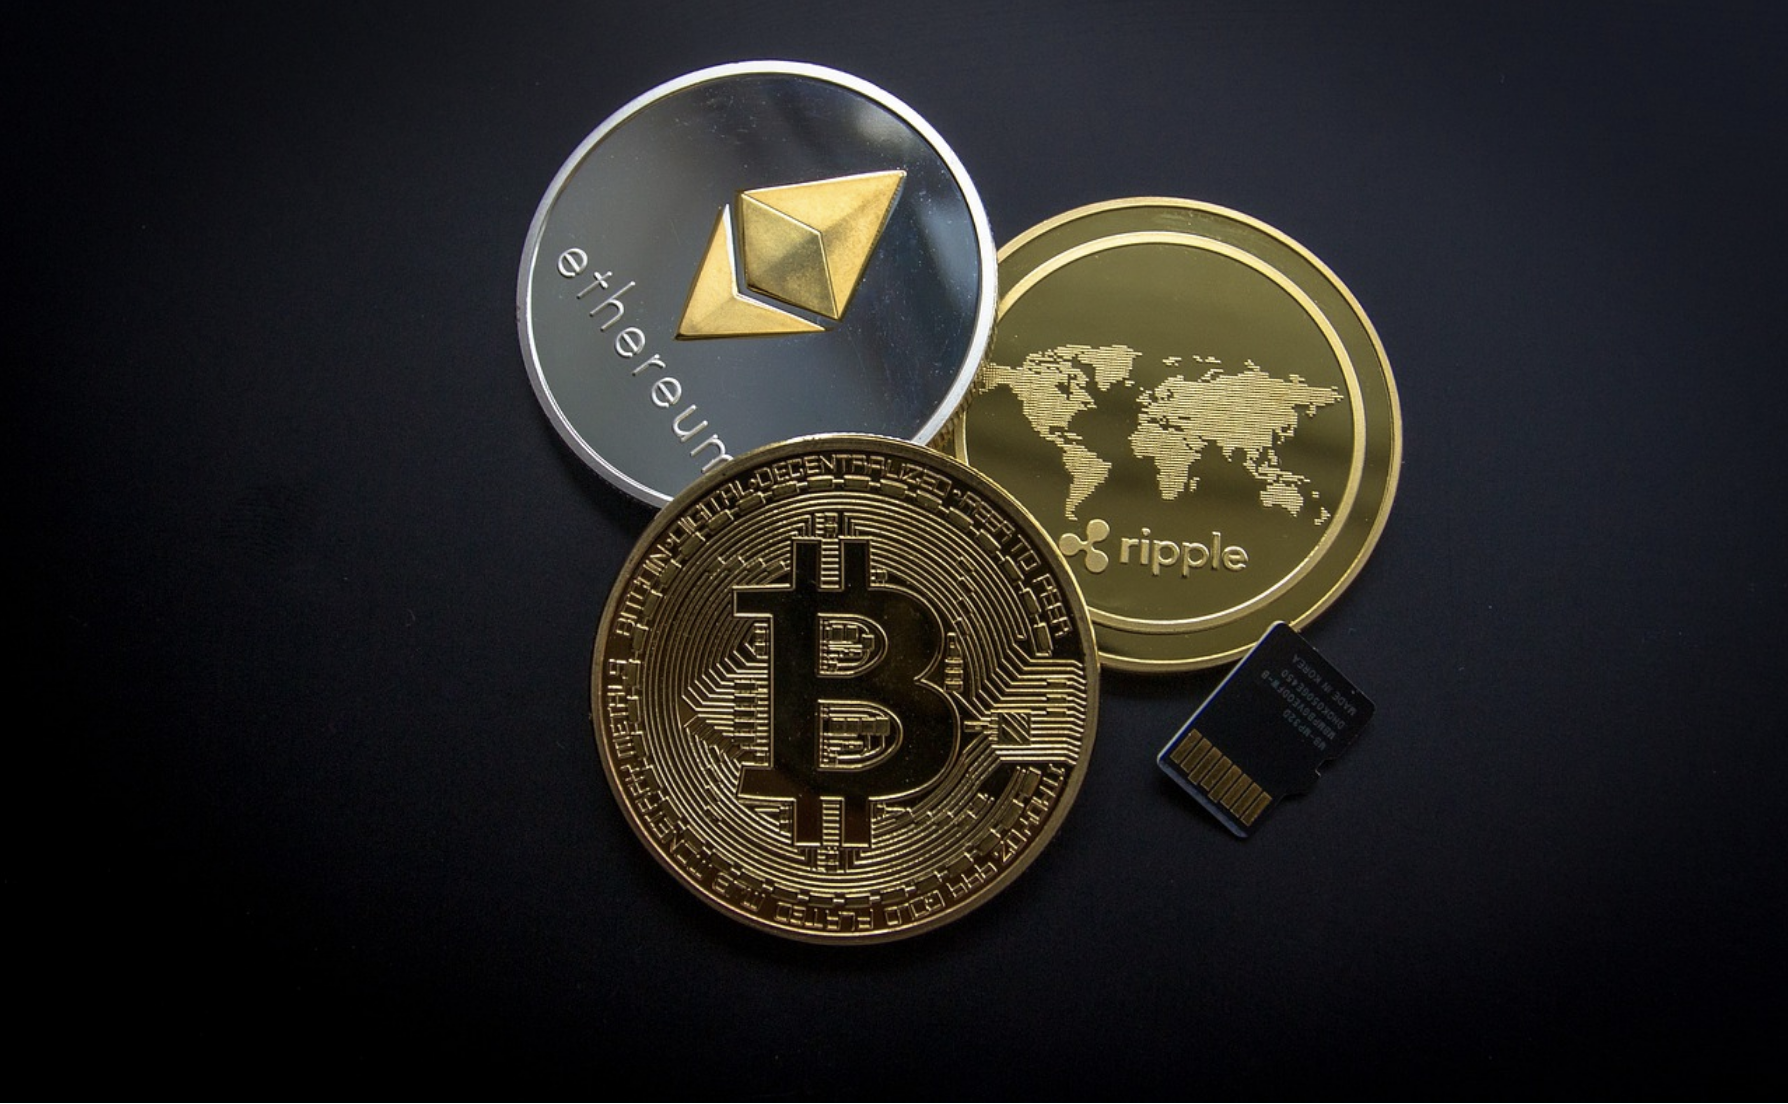 Are Cryptocurrencies Safe Investments